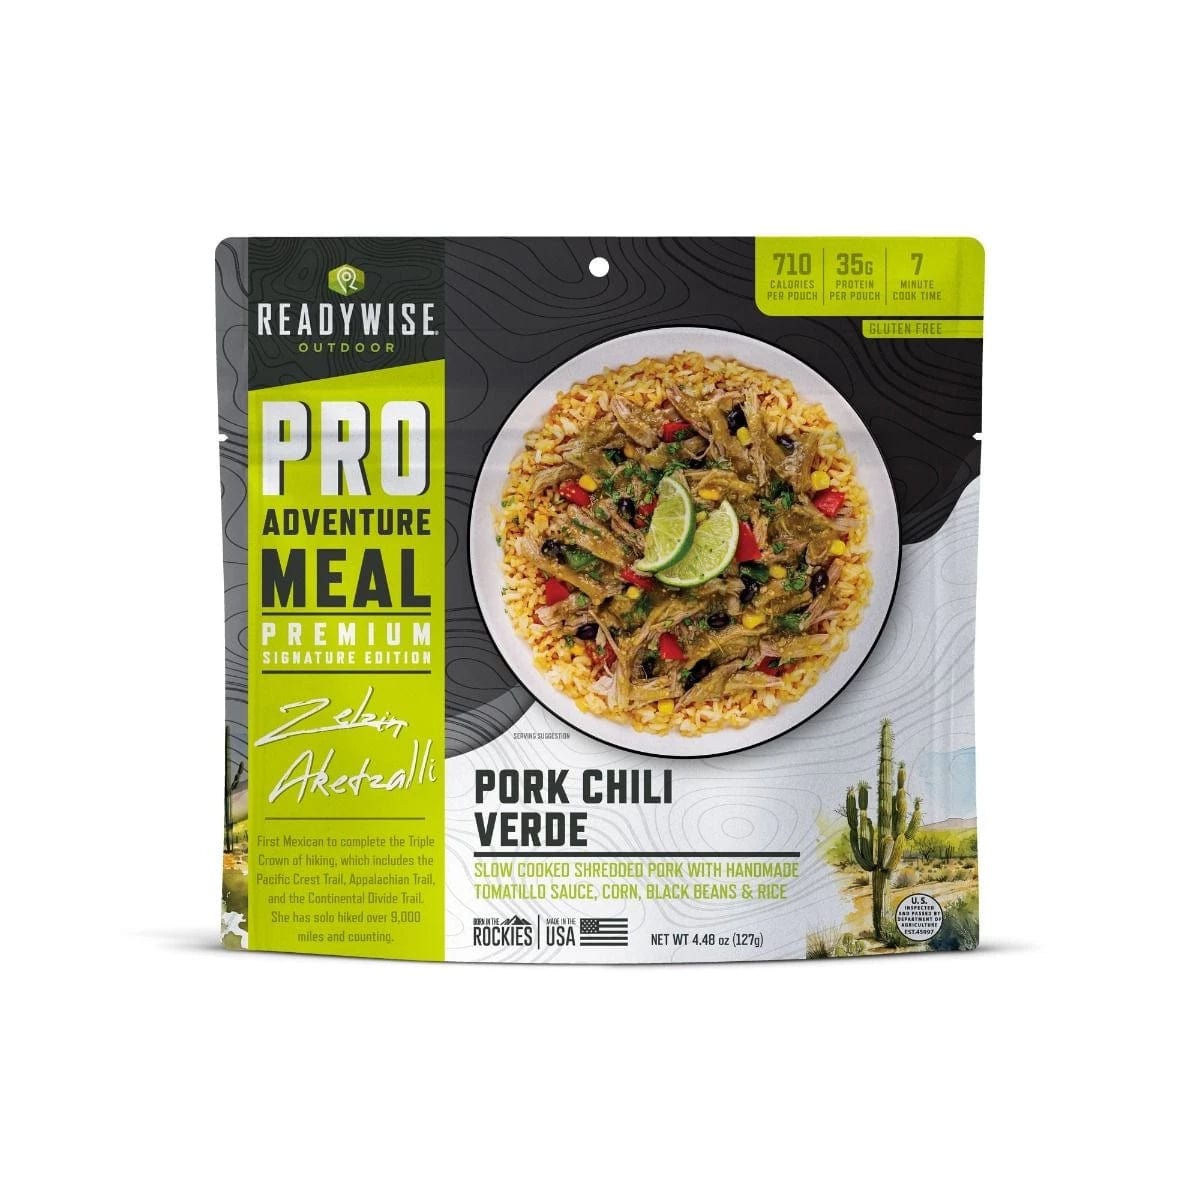 ReadyWise Outdoor Pro Pork Chile Verde Adventure Meal: Flavorful 6-Pack for Campers & Hikers